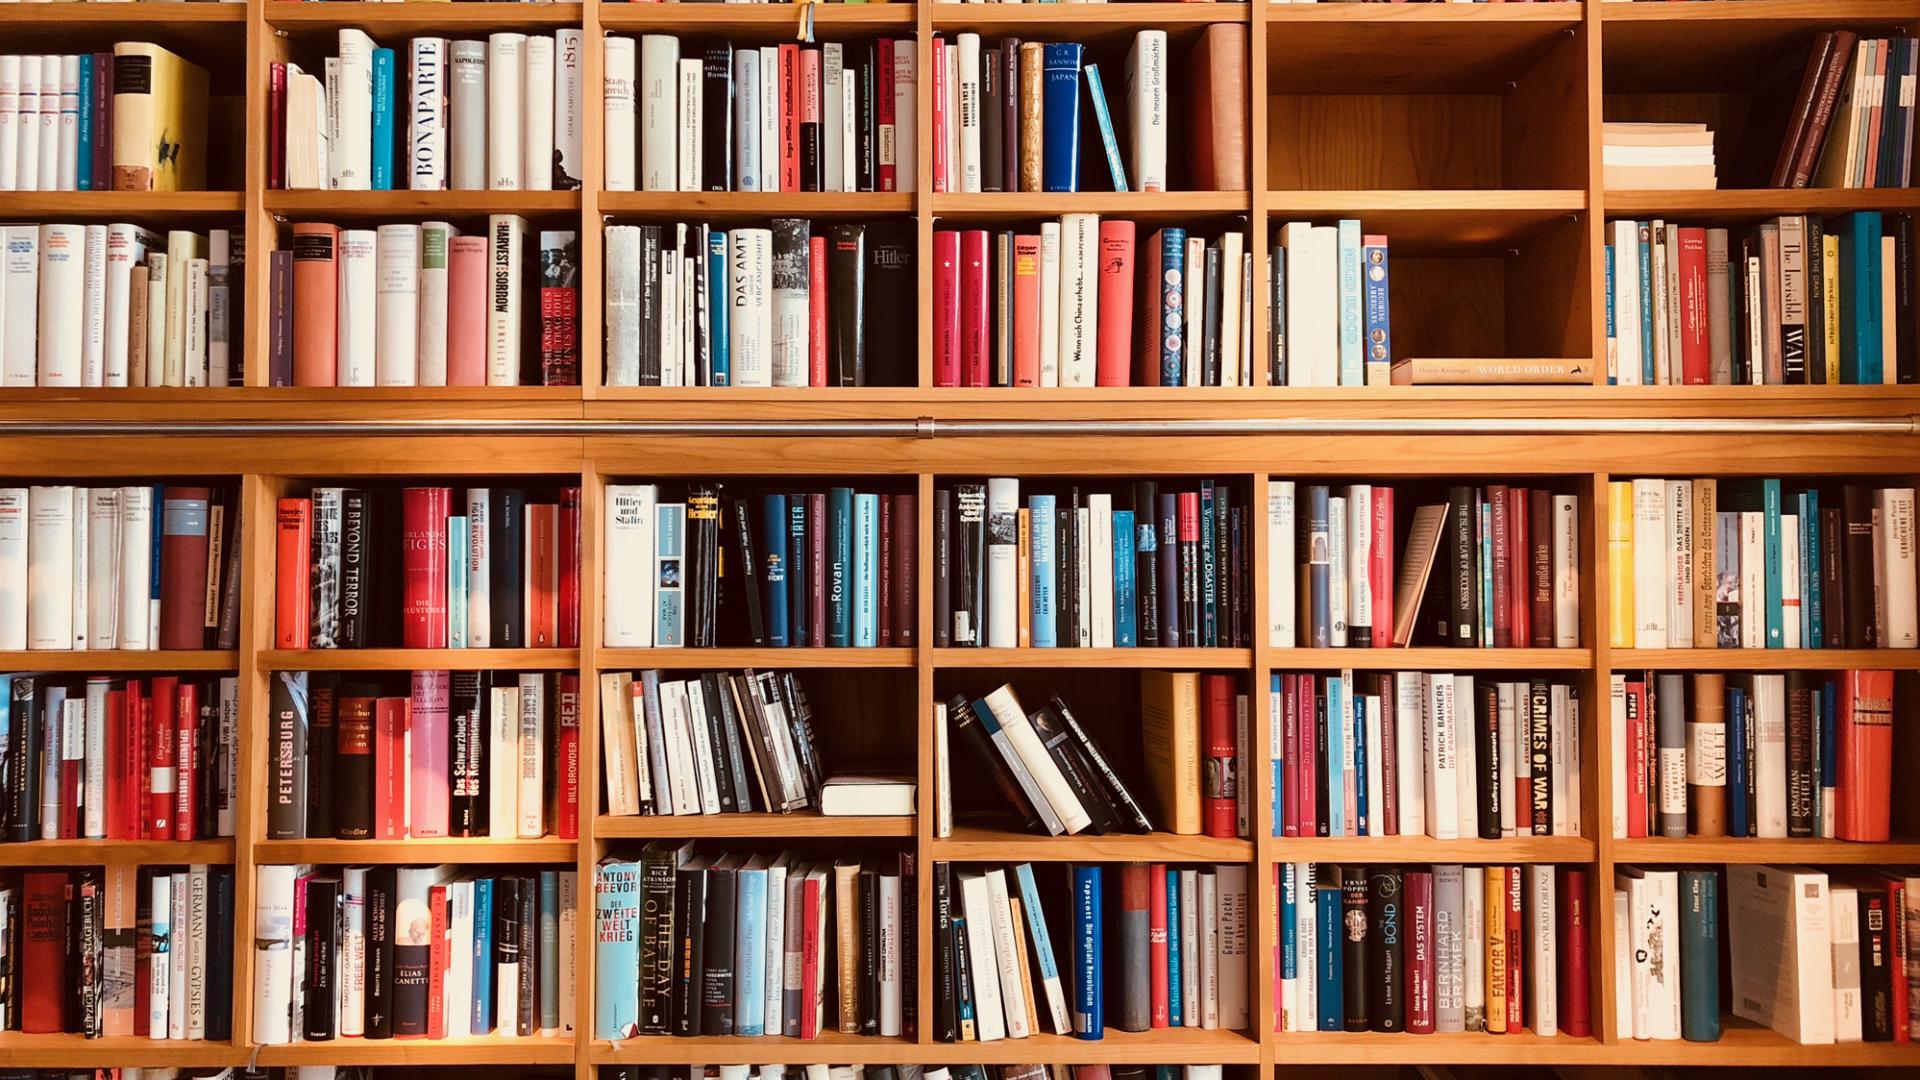 Images of books and shelves